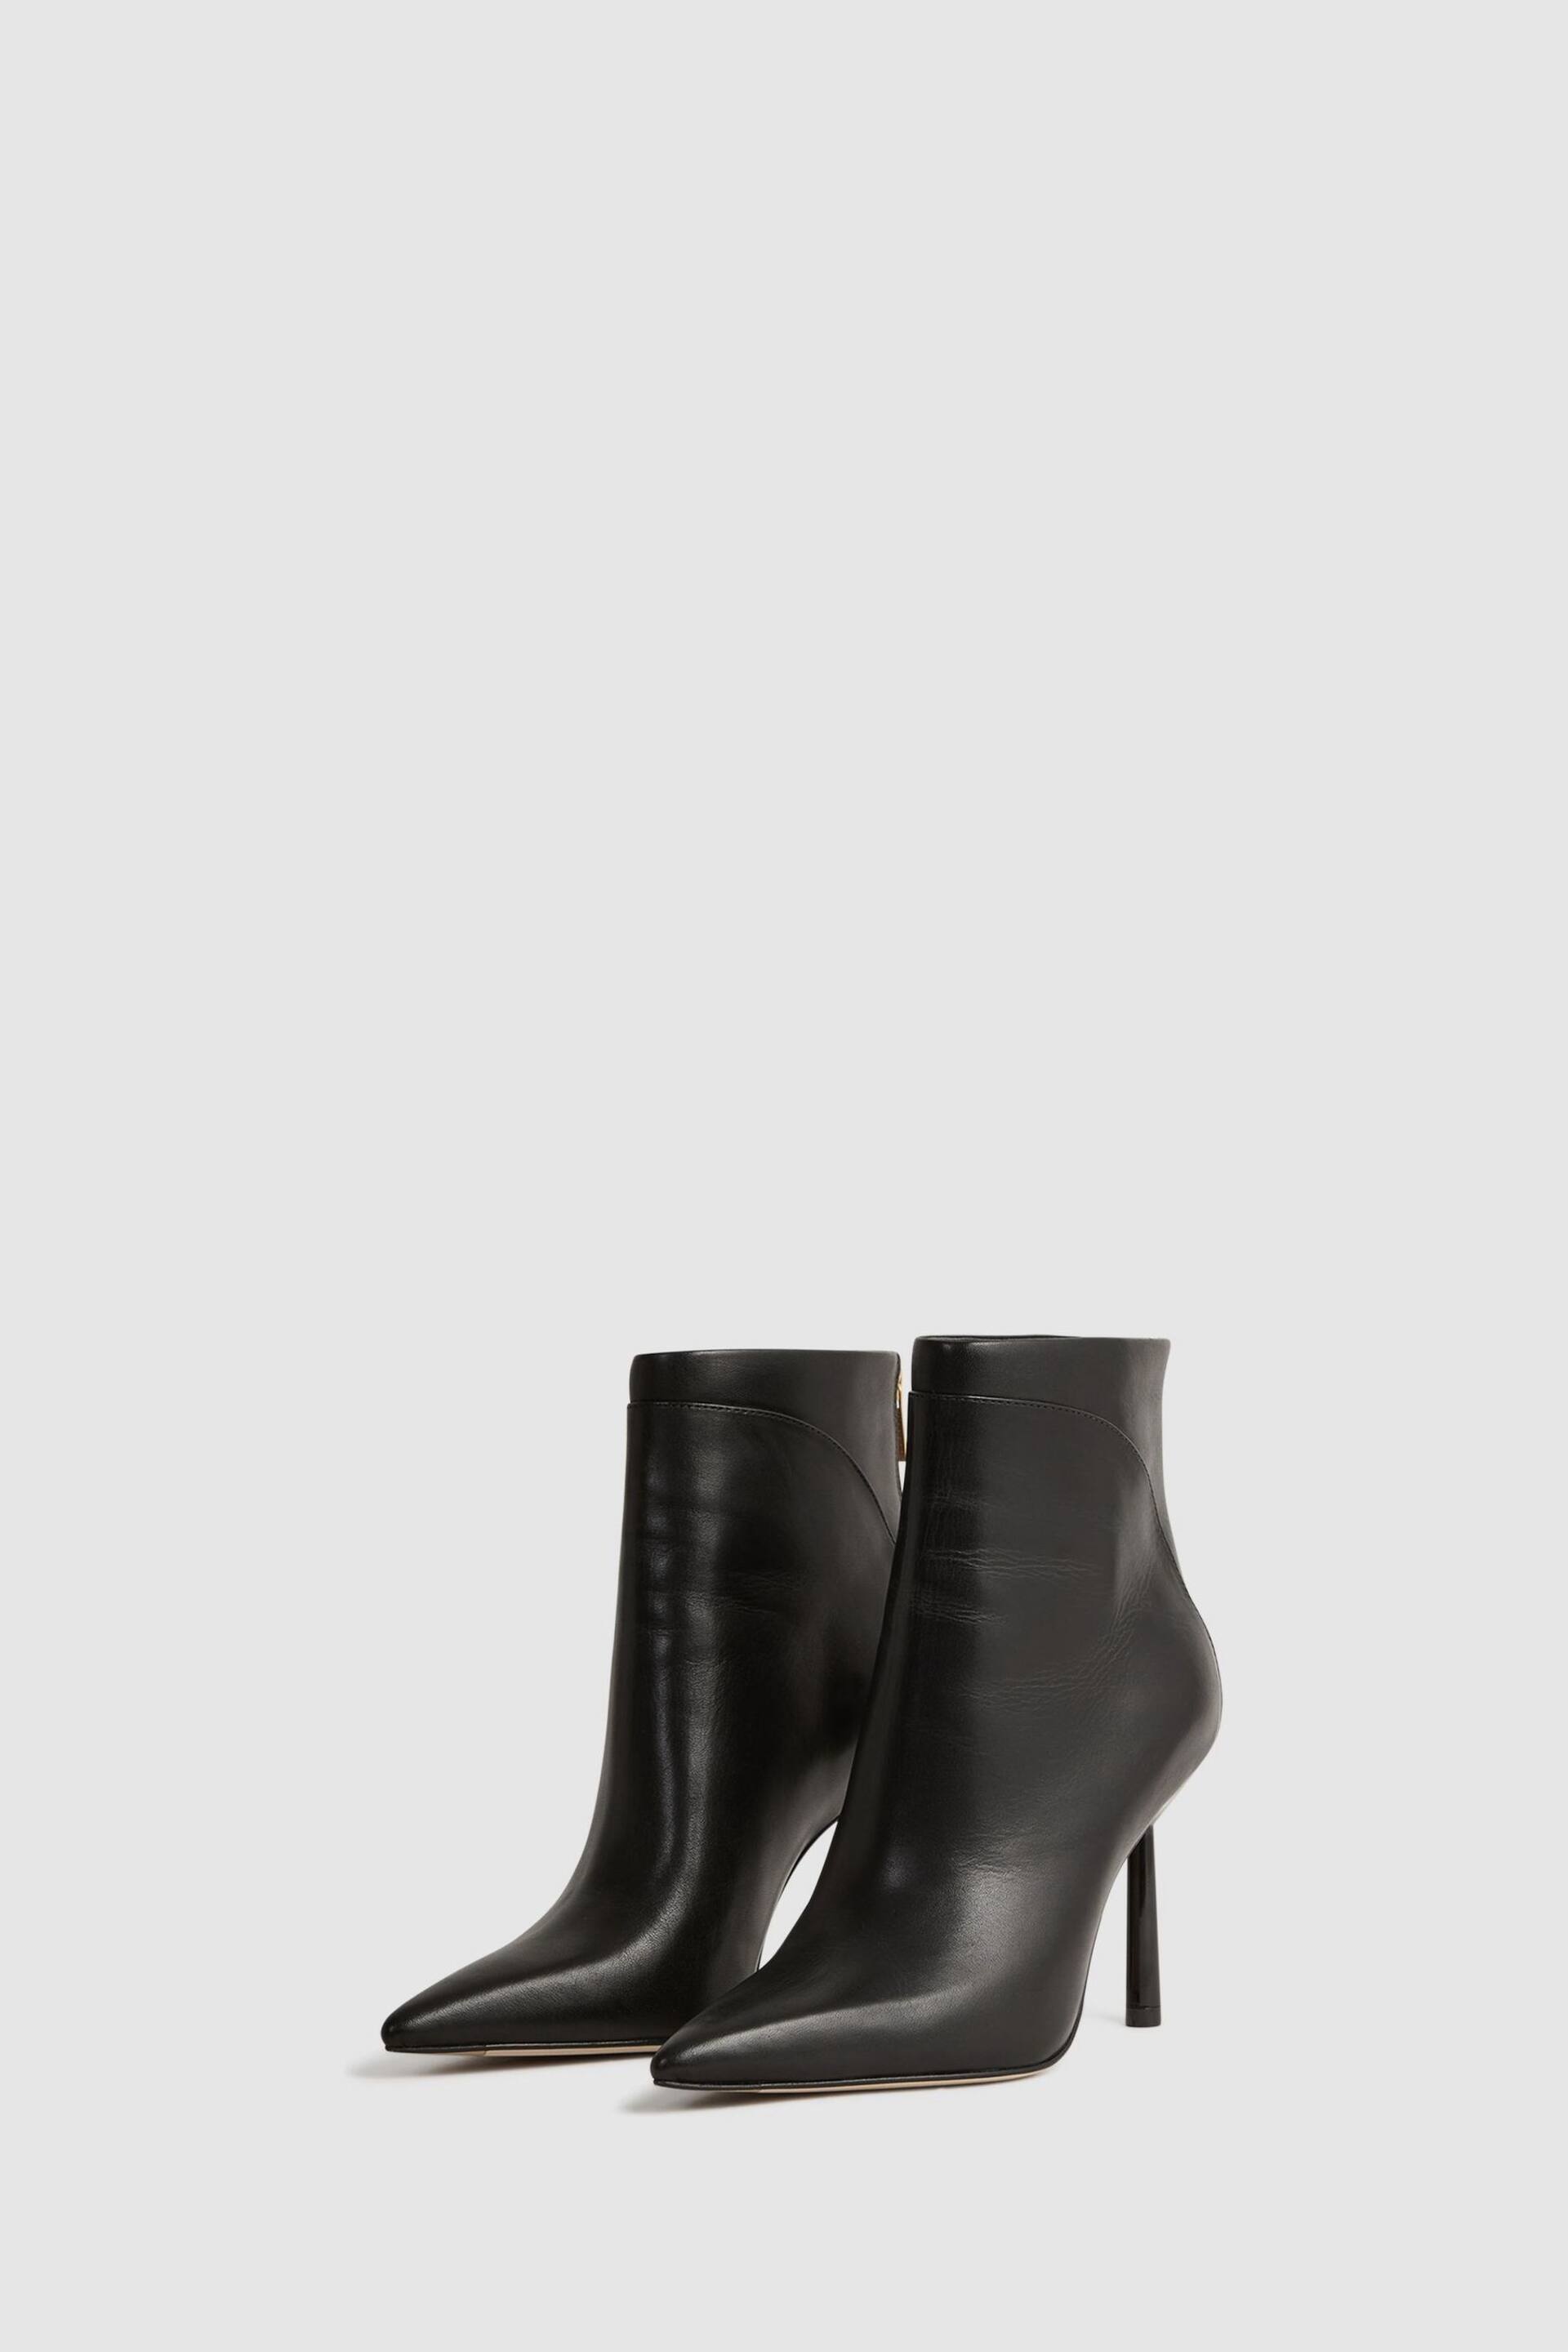 Reiss Black Lyra Signature Leather Ankle Boots - Image 3 of 5